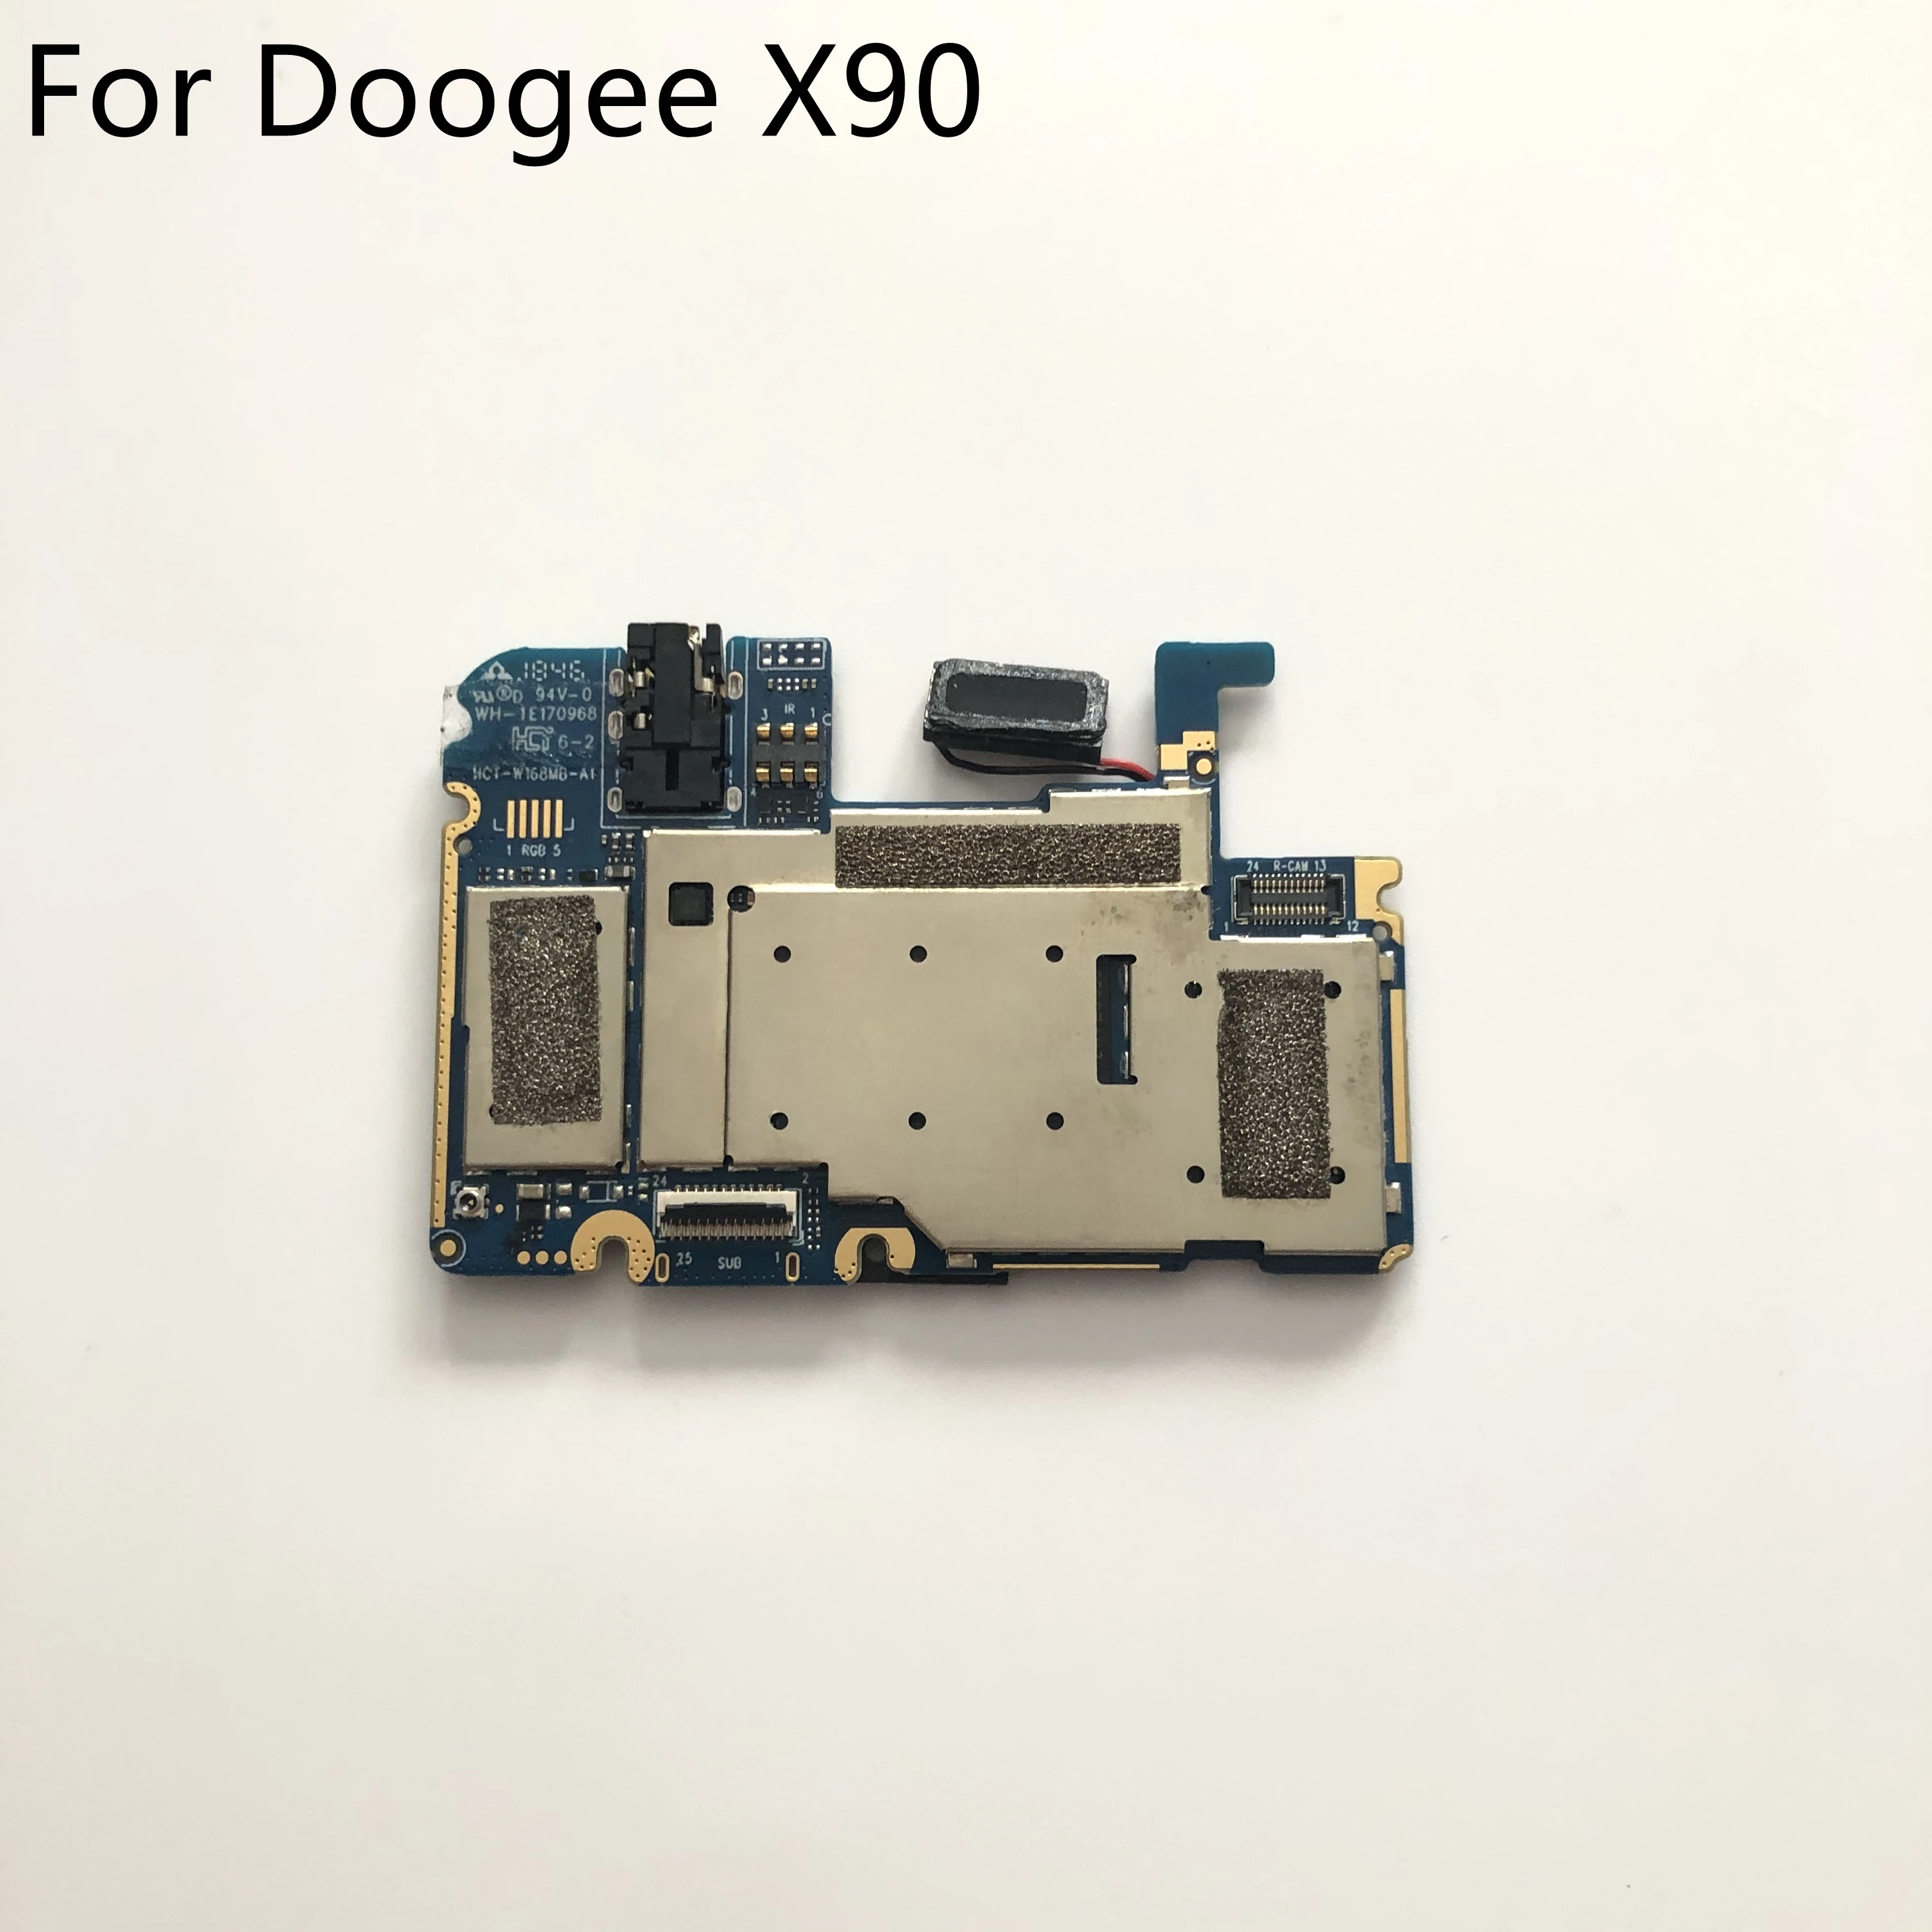 

Doogee X90 High Quality Mainboard 1G RAM+16G ROM Motherboard For Doogee X90 MT6580A Quad Core 6.1'' 1280*600 Free Shipping